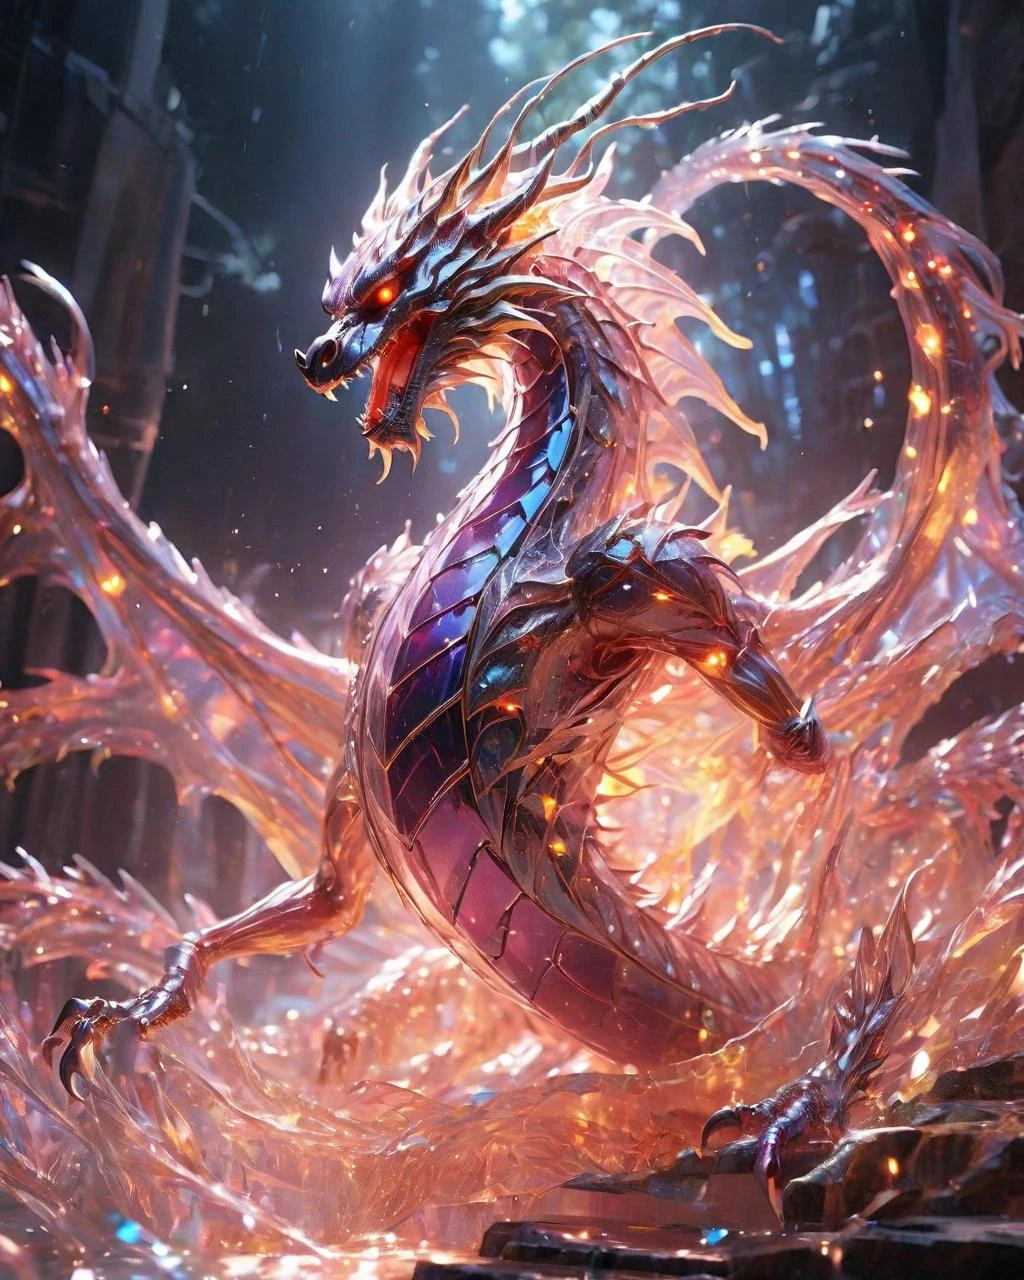 (super clear picture quality:1.8),masterpiece,best quality,
ultra-realistic mix fantasy,flood dragon,a mythical creature capable of invoking storms and floods,in the style of dark azure and light azure,mixes realistic and fantastical elements,vibrant manga,uhd image,glassy translucence,vibrant illustrations,ultra realistic,jewelly,shawls,light In eyes,red eyes,firefly,bokeh,mysterious,fantasy,cloud,abstract,colorful background,night sky,flame,very detailed,high resolution,sharp,sharp image,4k,8k,masterpiece,best quality,magic effect,(high contrast:1.4),dream art,diamond,mysterious colorful background,dark blue themes,real,holographic,an oriental dragon,inhuman,holographic metal,machine,the perfect hand,perfect face,